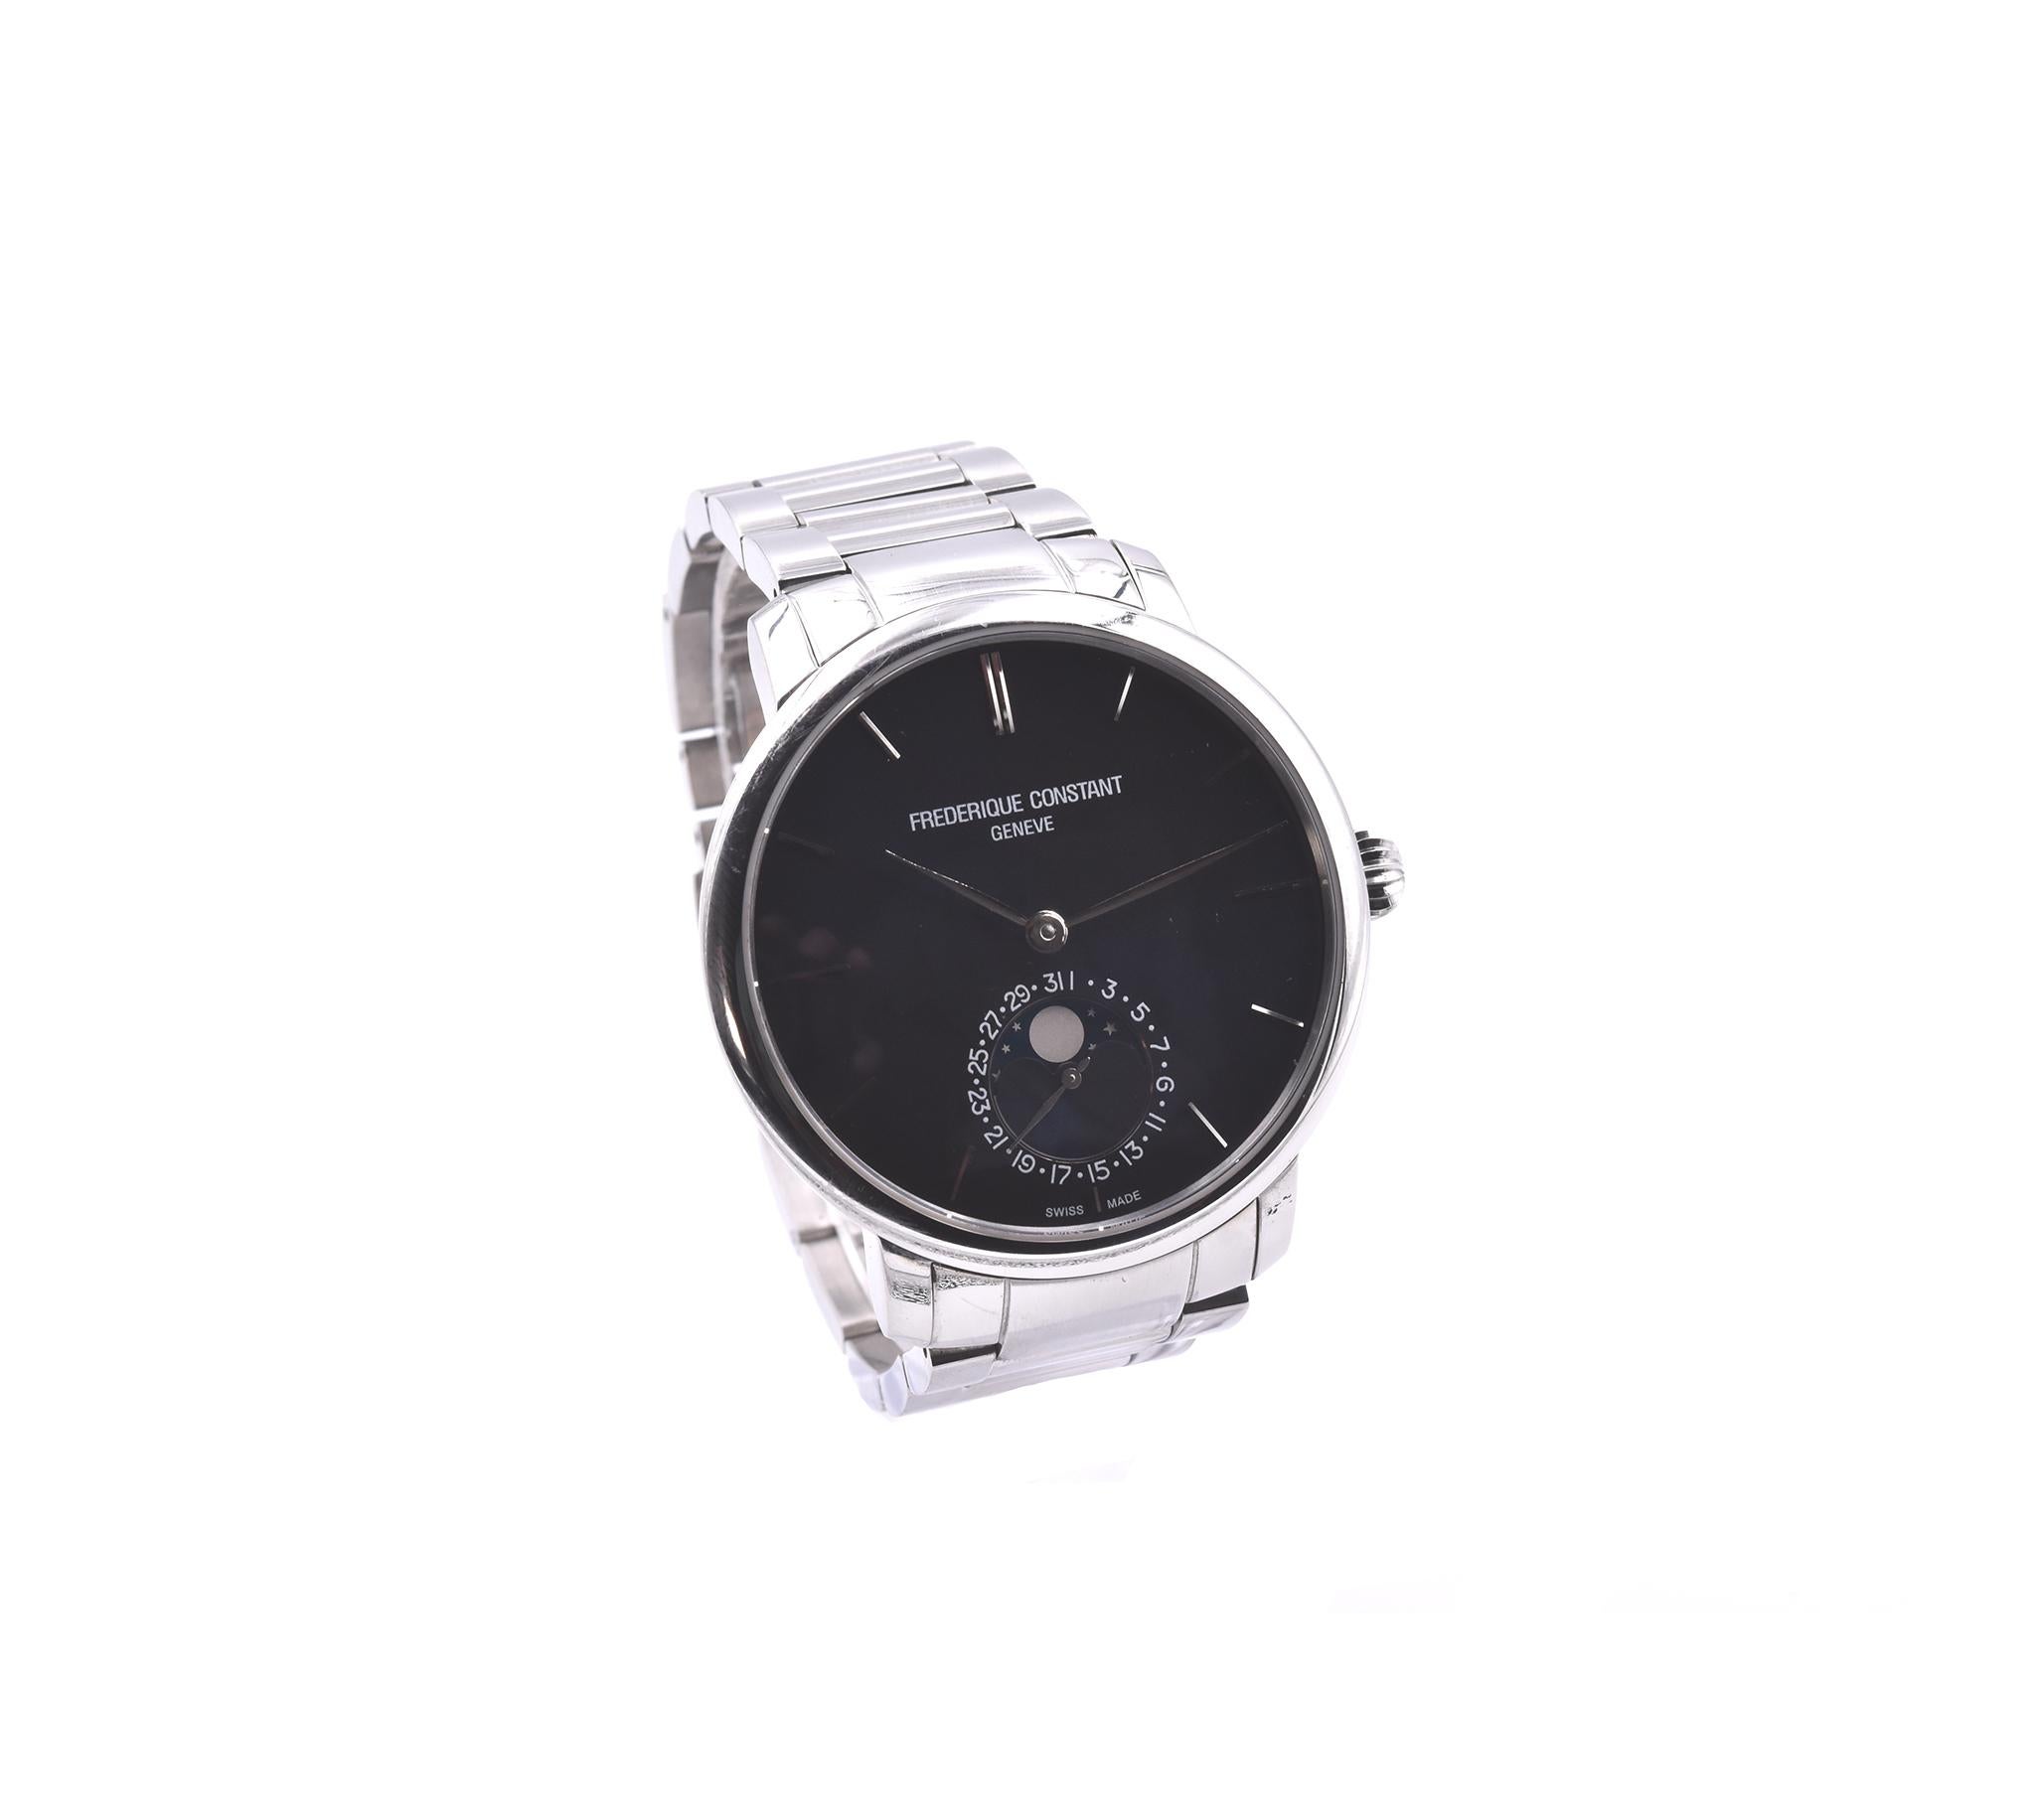 Movement: automatic
Function: hours, minutes, moon phase
Case: 42mm stainless steel case, sapphire crystal, smooth bezel
Band: stainless steel bracelet
Dial: blue dial with stainless steel hands and hour markers
Reference #: FC-705X454/5/6
Serial #: